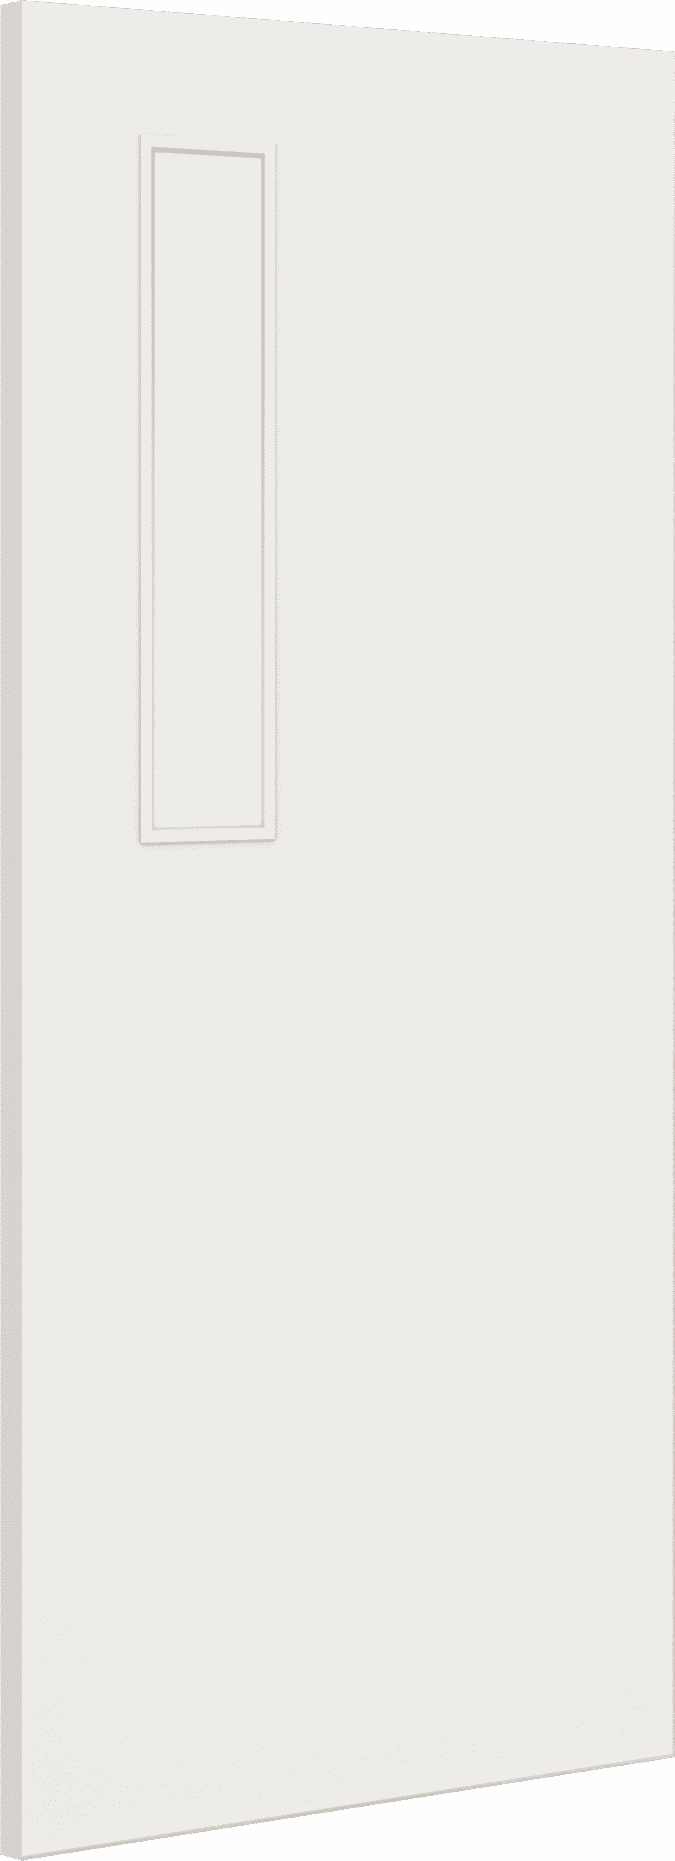 1981mm x 533mm x 44mm (21") Architectural Paint Grade White 08 Clear Glazed Fire Door Blank